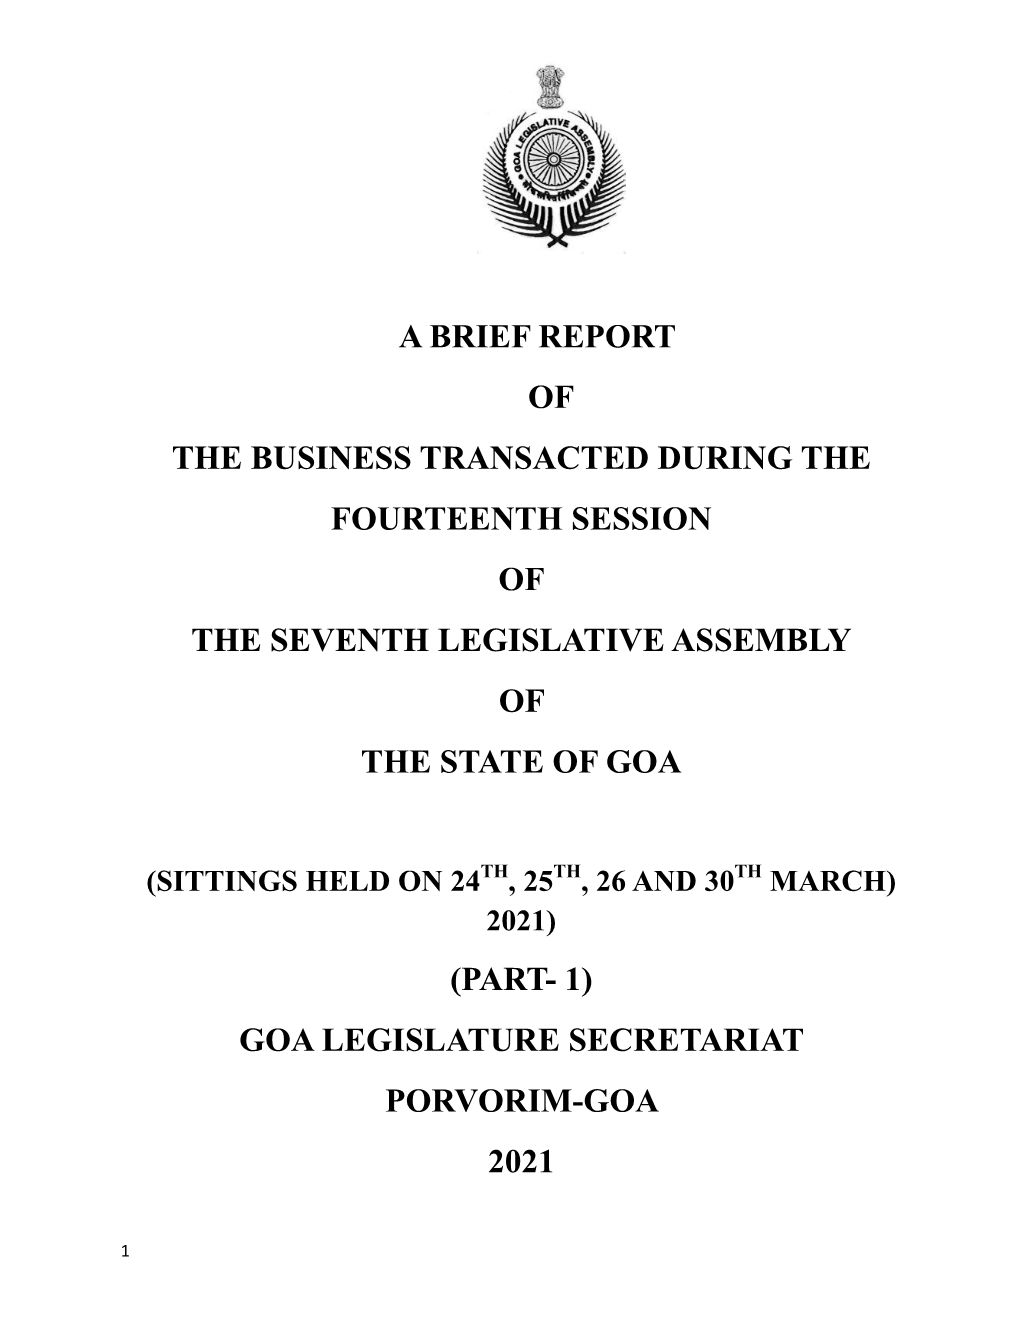 A Brief Report of the Business Transacted During the Fourteenth Session of the Seventh Legislative Assembly of the State of Goa